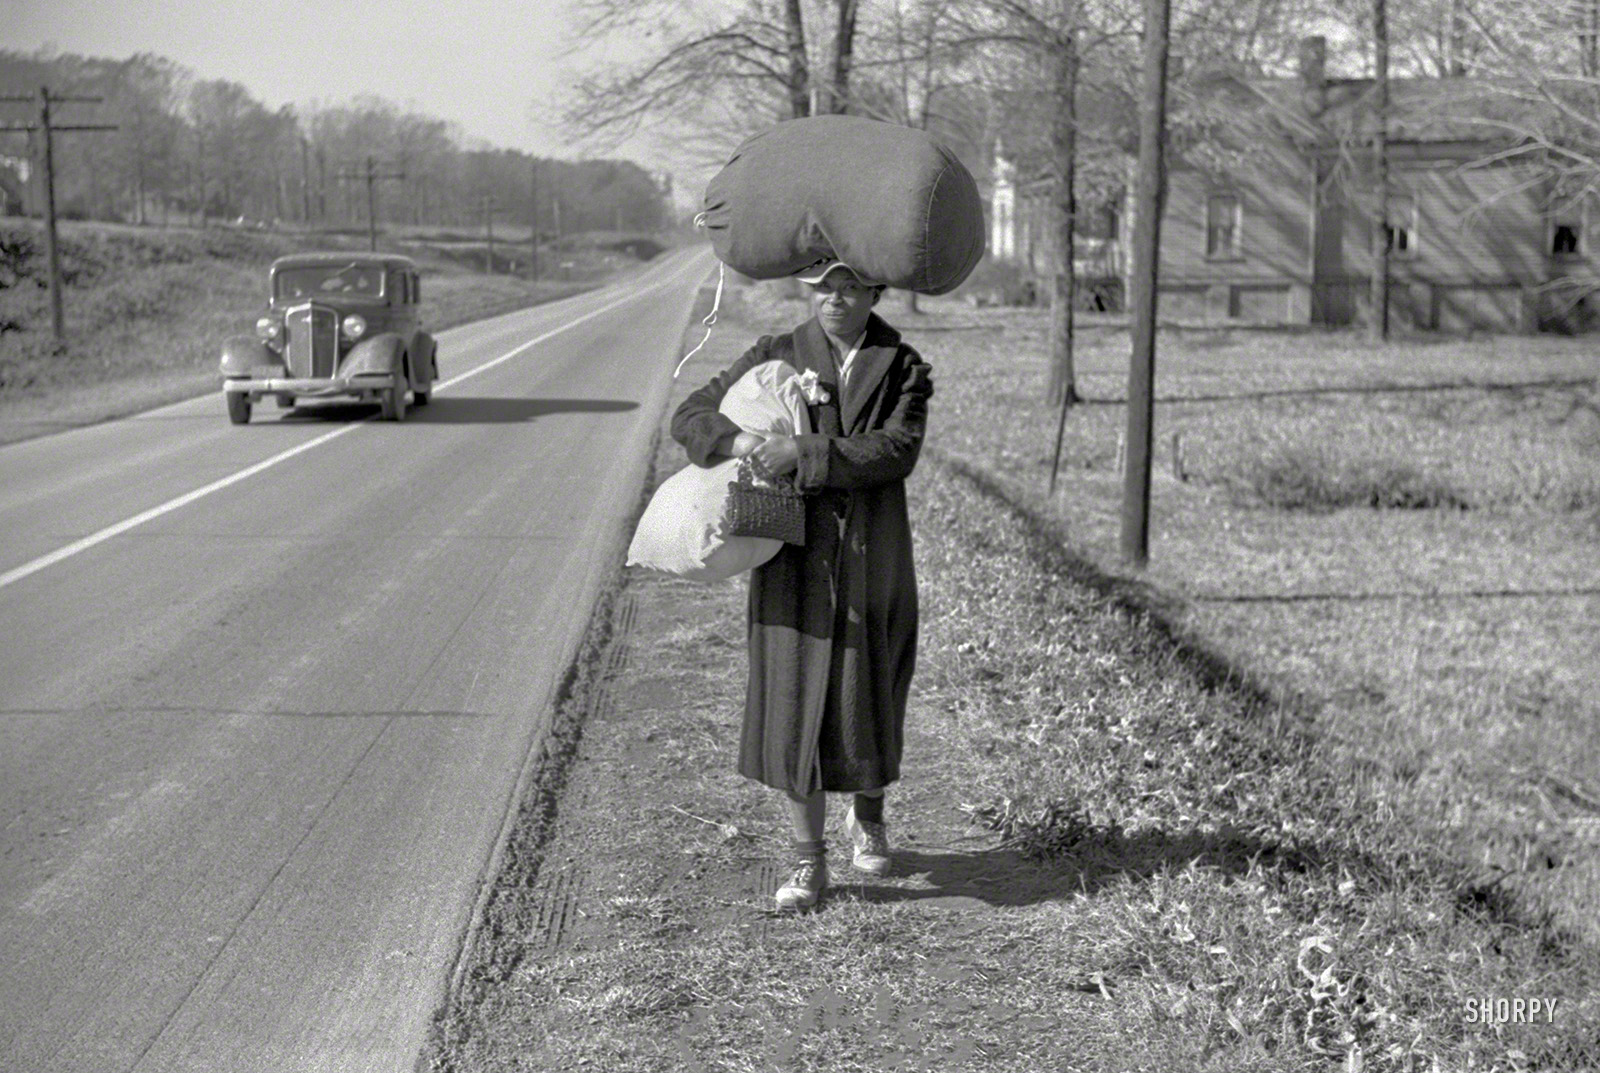 &nbsp; &nbsp; &nbsp; &nbsp; For millions of women across America in the first half of the 20th century, working from home might mean "taking in wash" for another family.
November 1939. "Negro woman carrying laundry home along highway between Durham and Mebane, North Carolina." 35mm nitrate negative by Marion Post Wolcott for the Resettlement Administration. View full size.